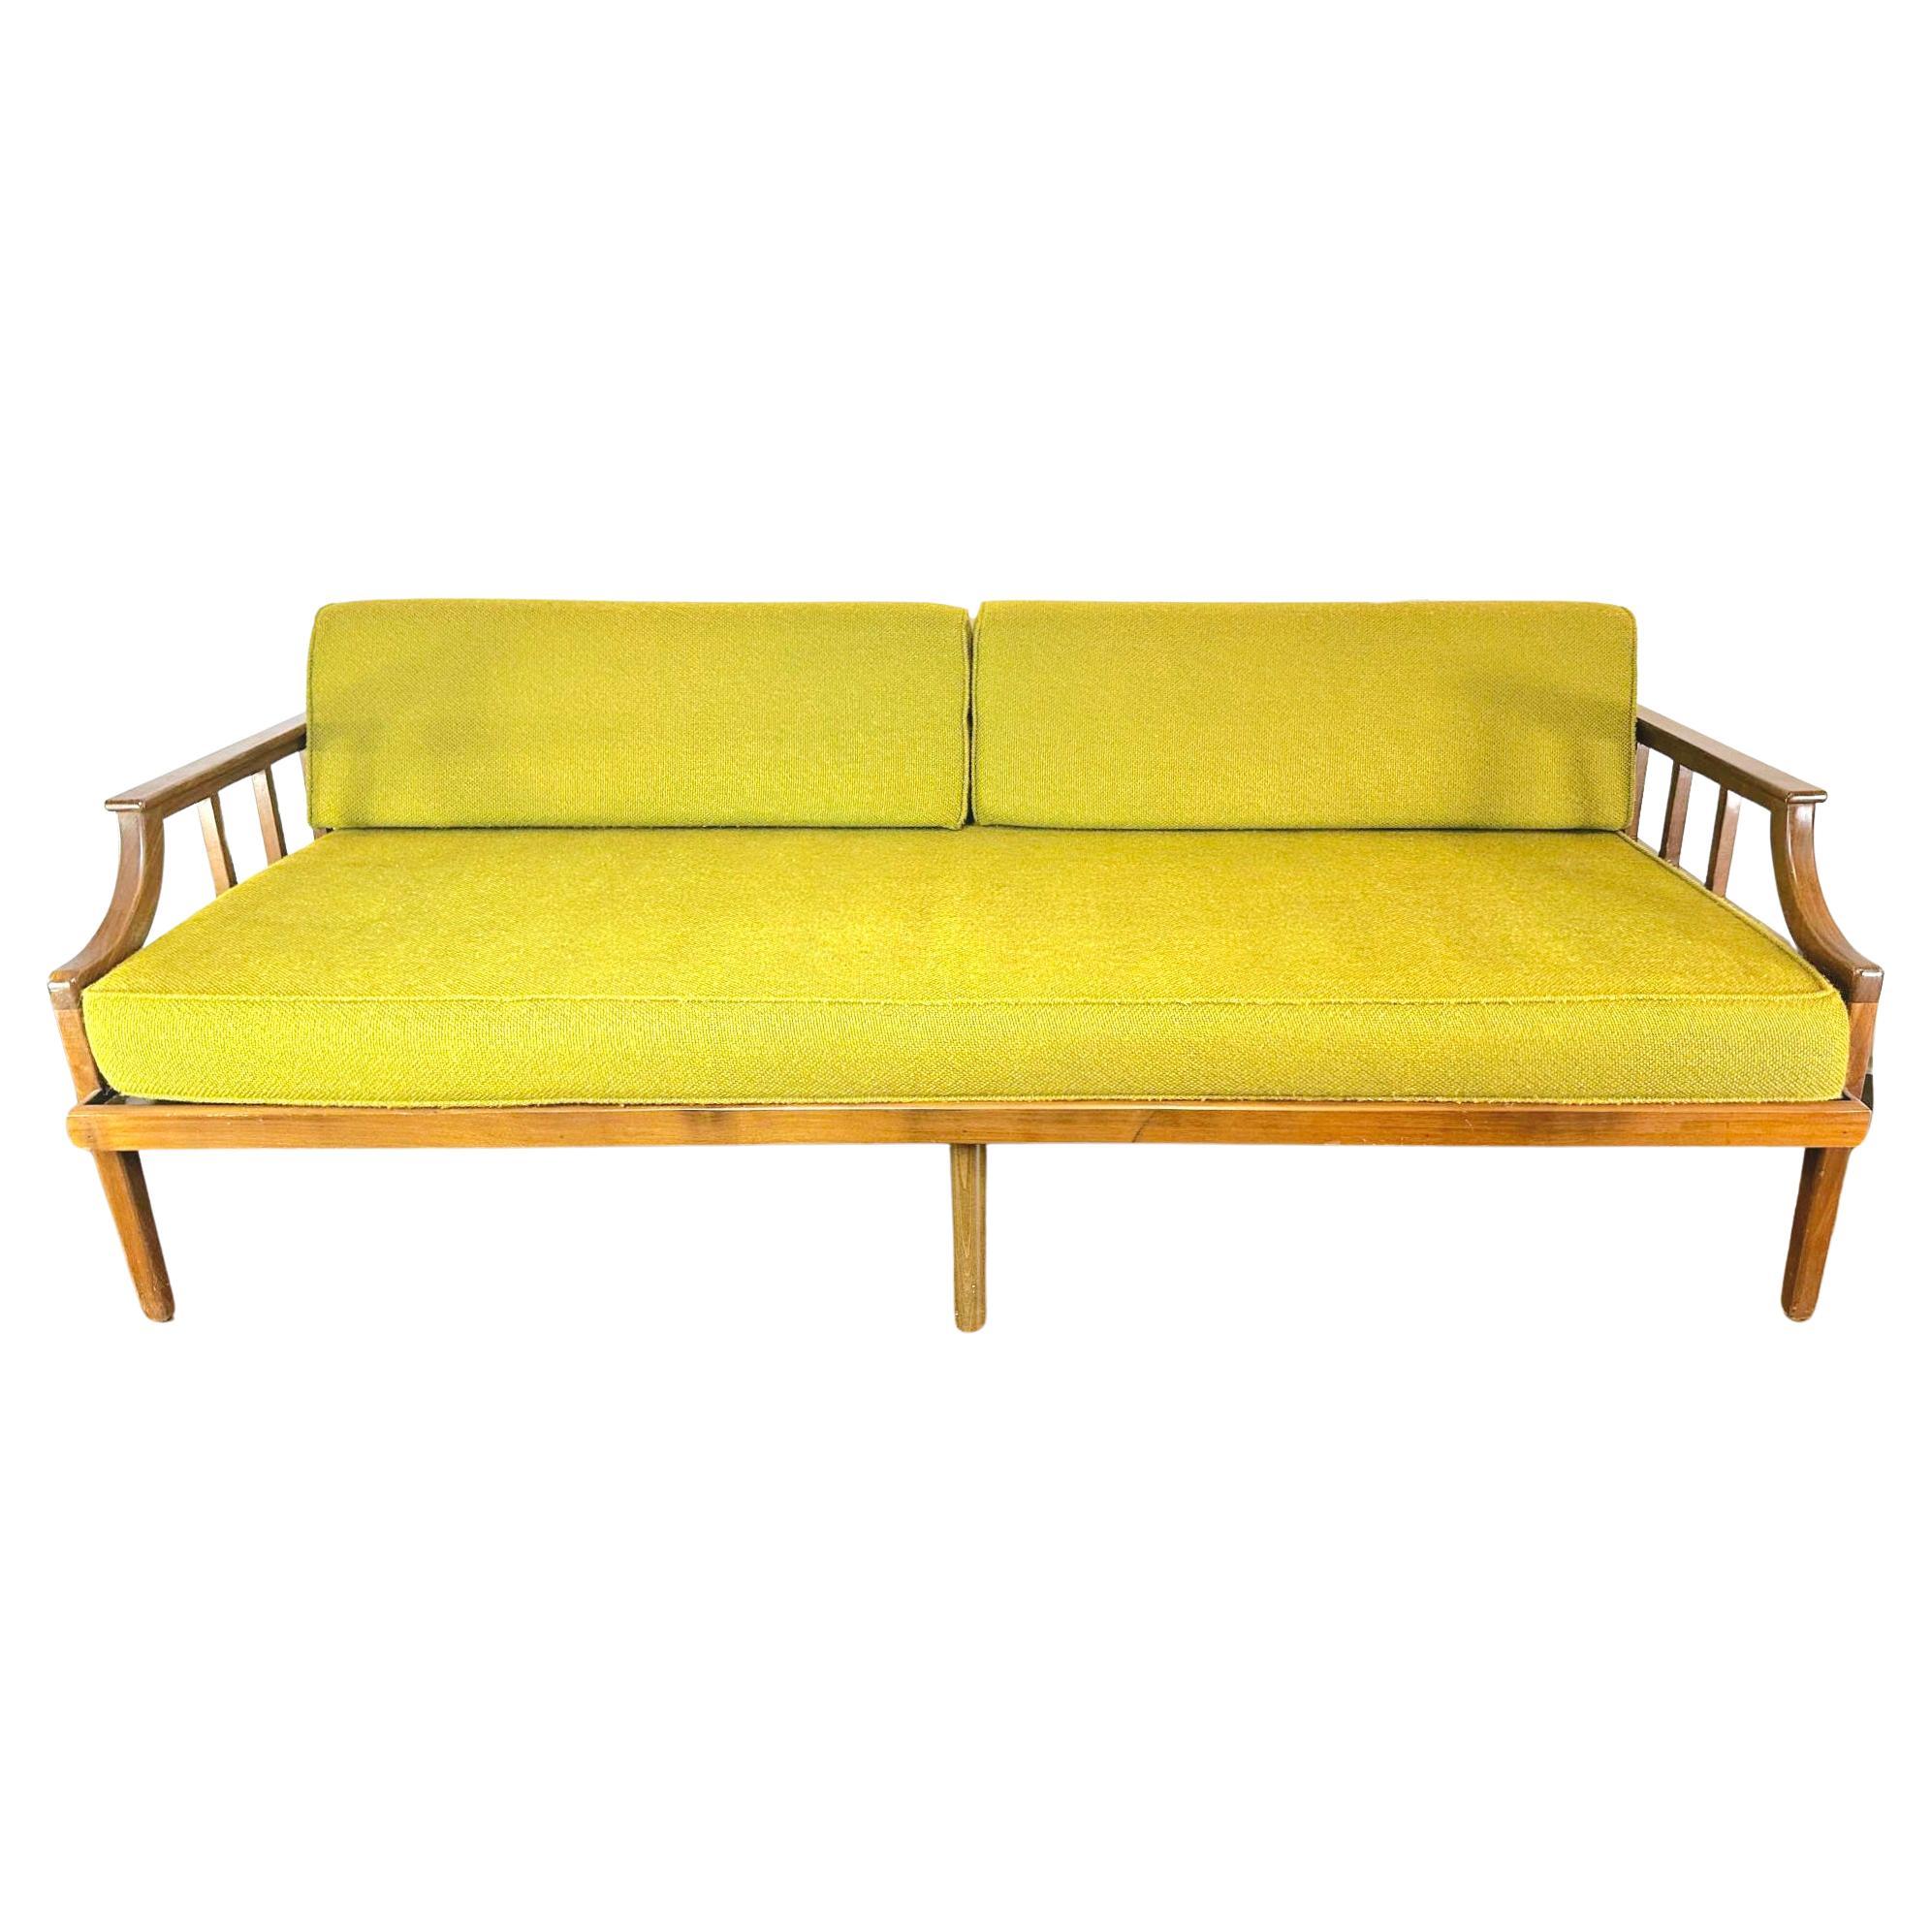 Canapé / Loveseat / Daybed vert teck, 1966